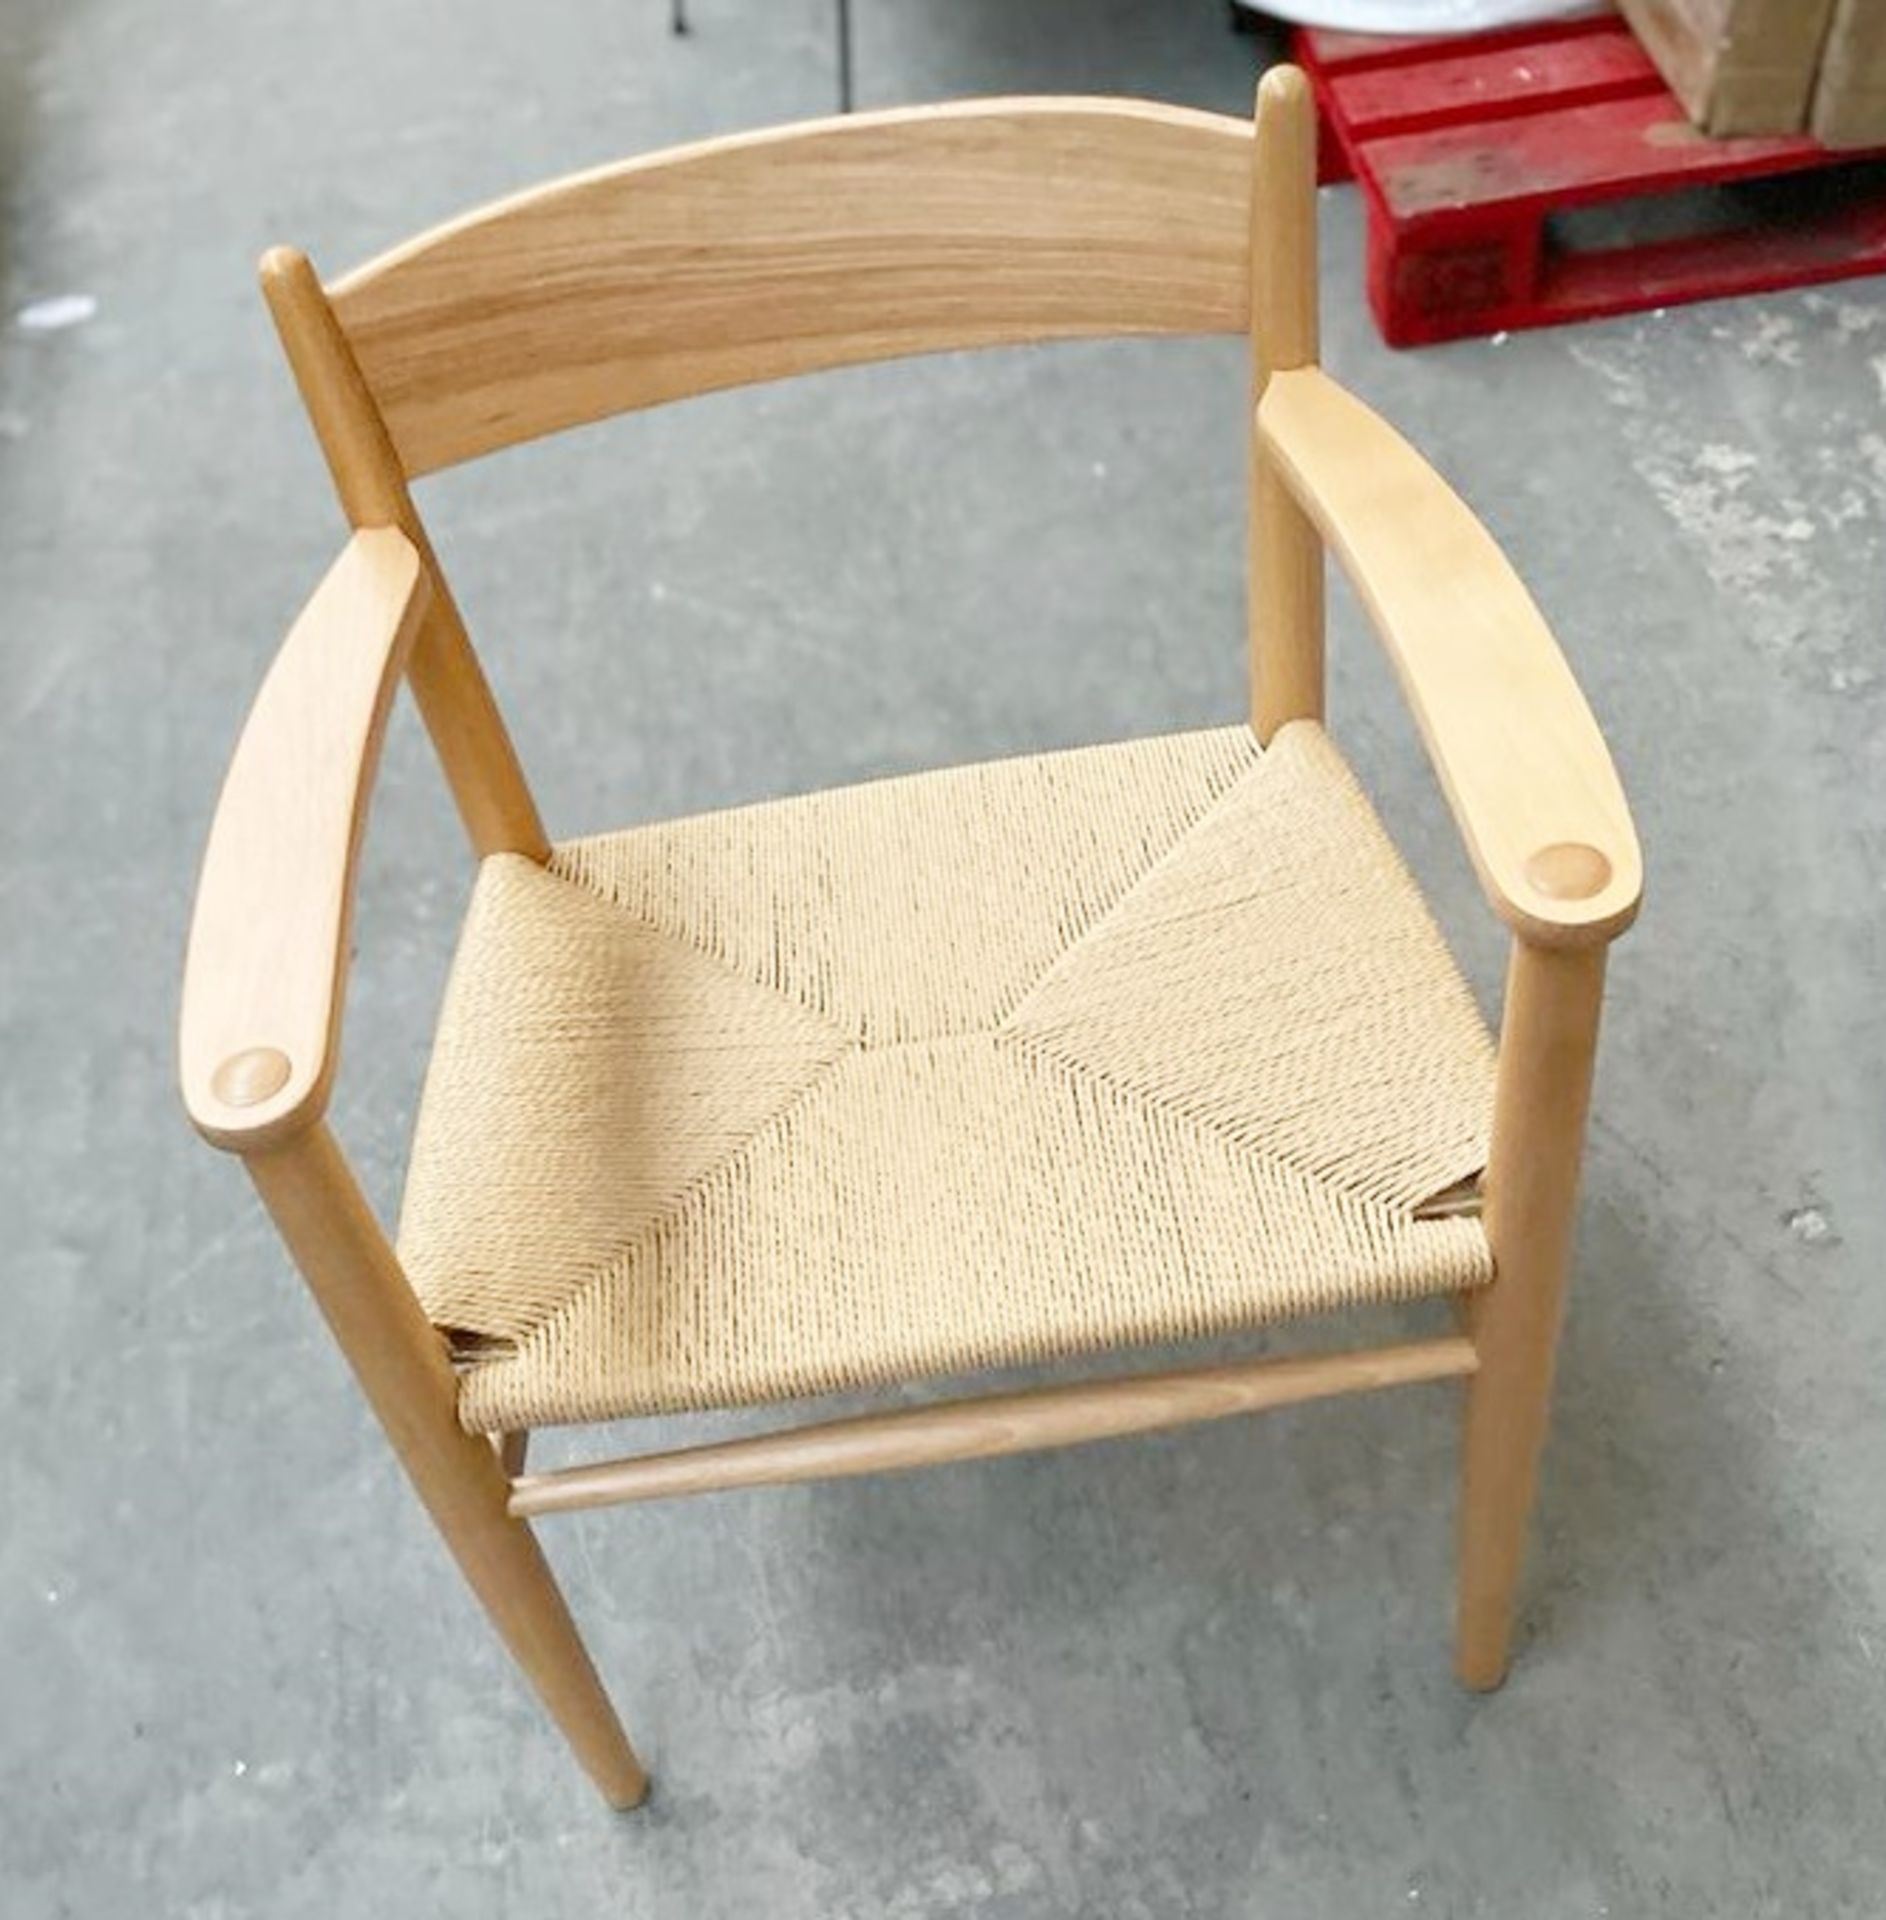 1 x Natural + Natural Cord Chair With Arm Rests - Dimensions: 50(h) x 48(d) x 58(w) cm - Brand New - Image 3 of 6